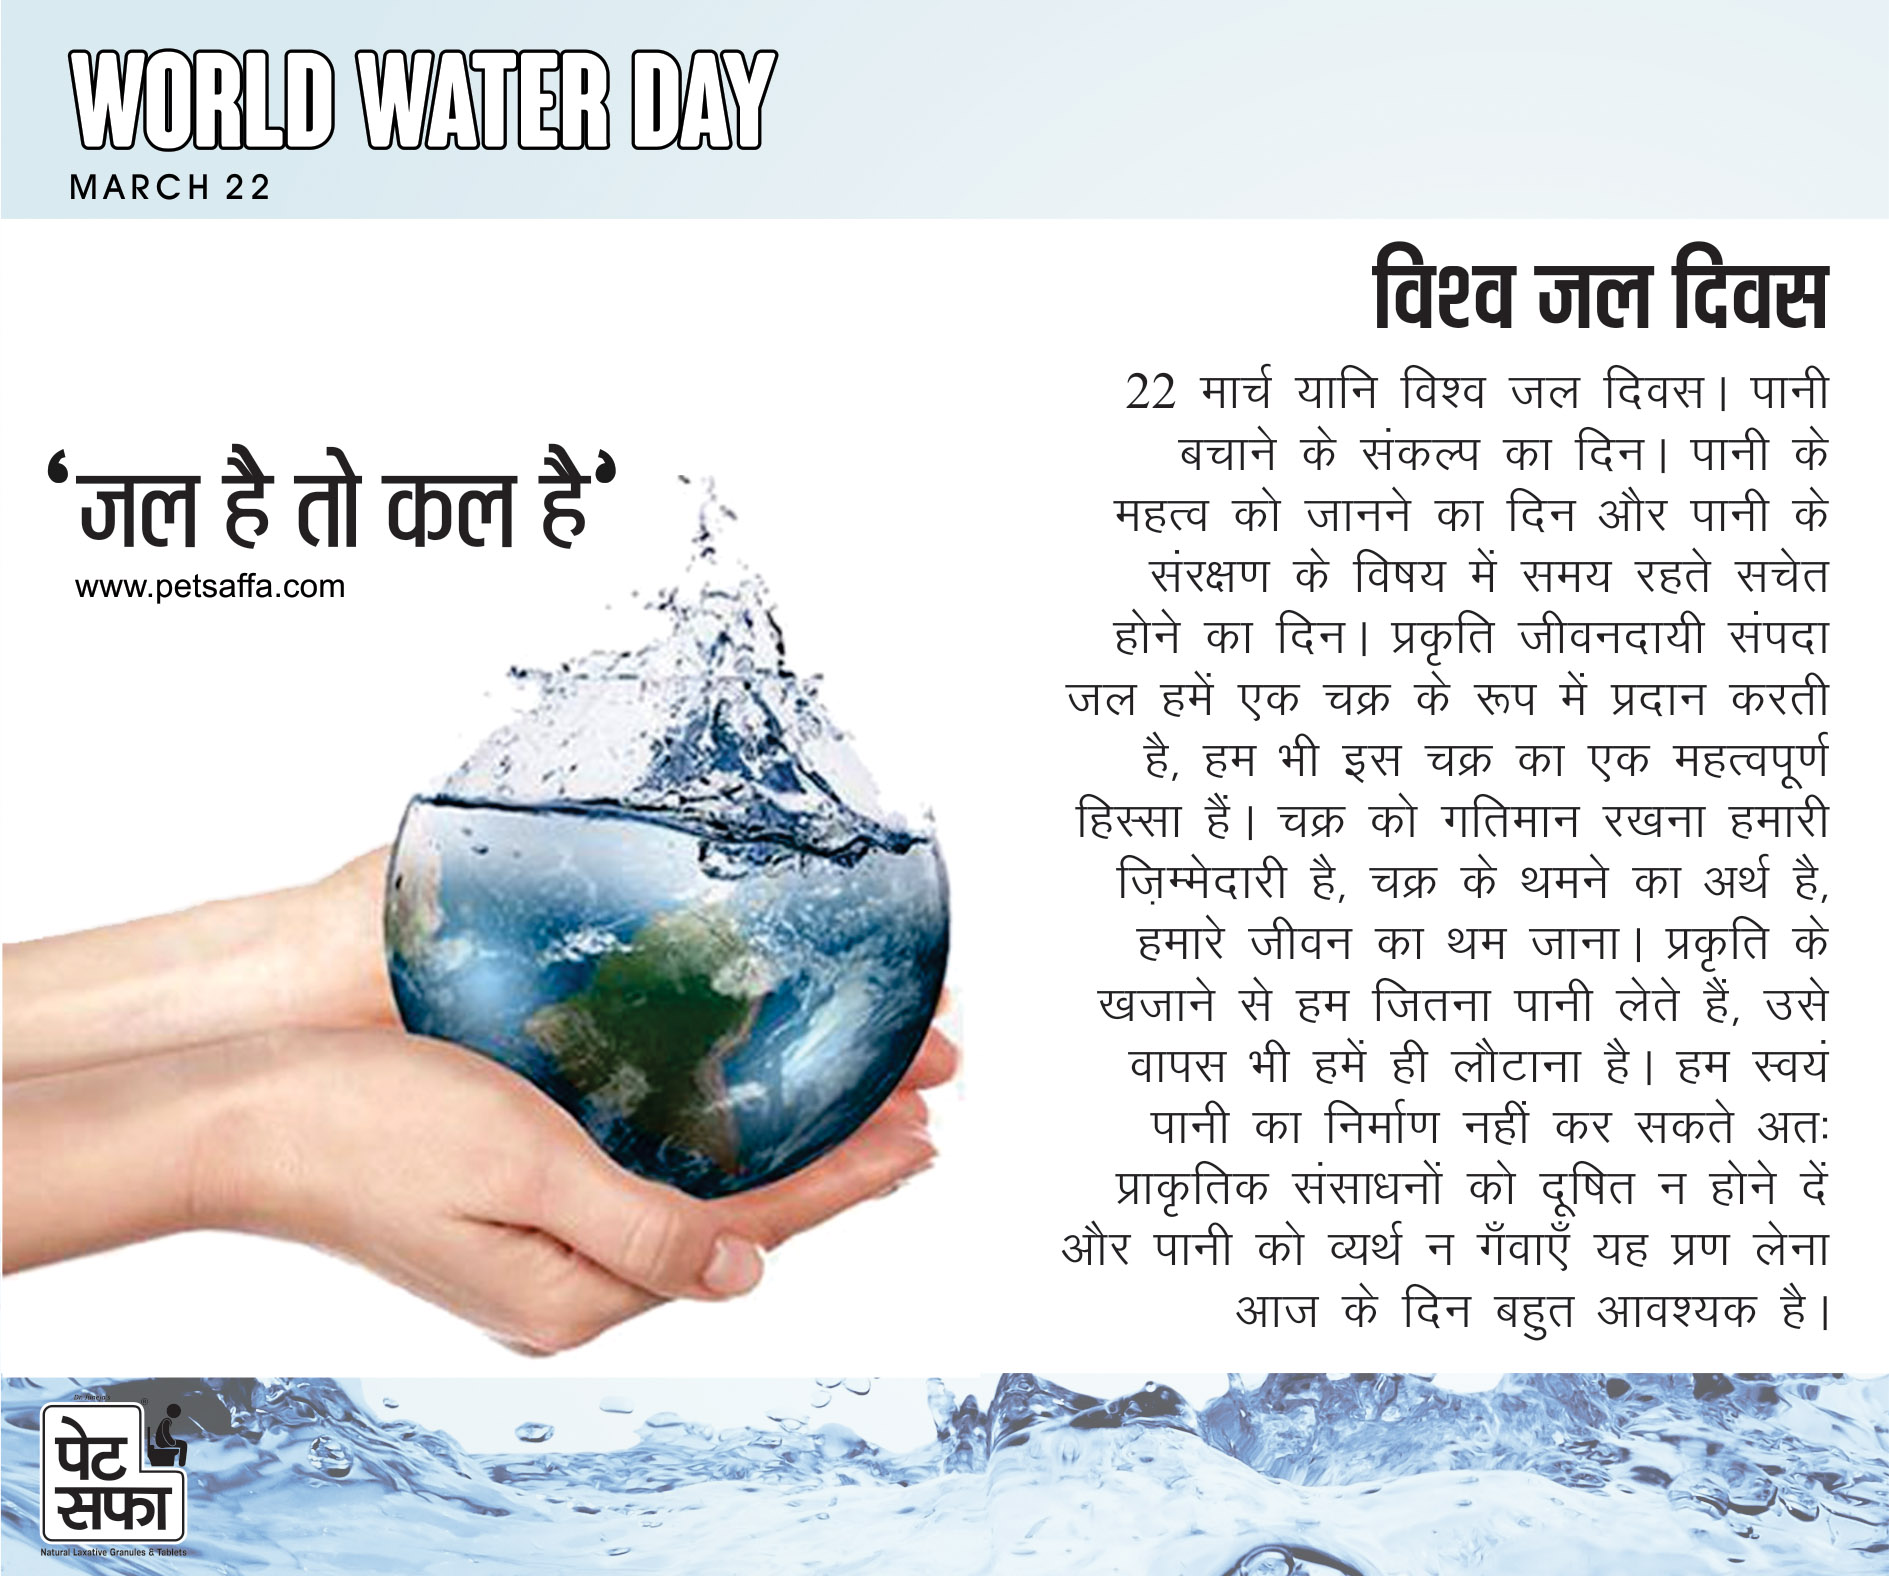 World Water Day, March Special, Special March Dates, International Days, Rememberable March, Whats Special In March 2018, Best Of March 2018, Special Quotes, Status, March 2018 Special (1)